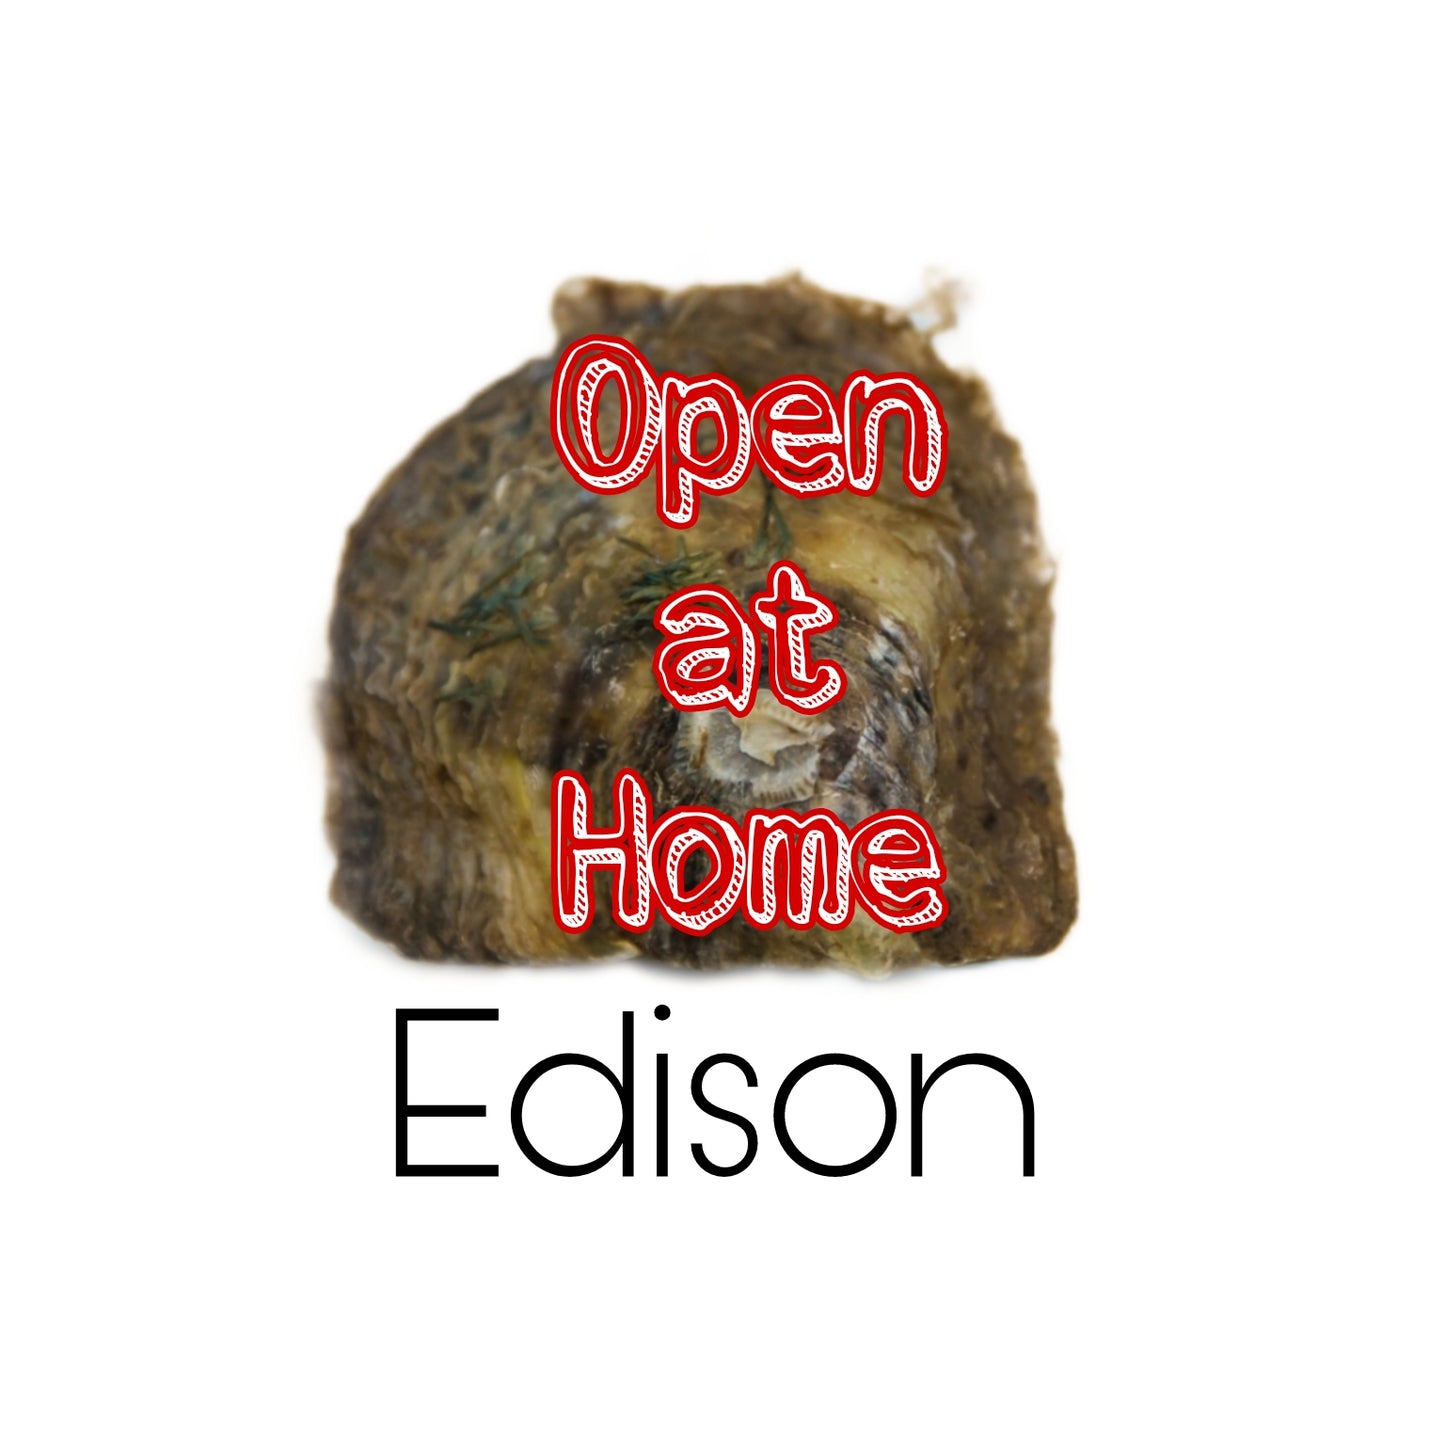 Open at Home Edison Oyster